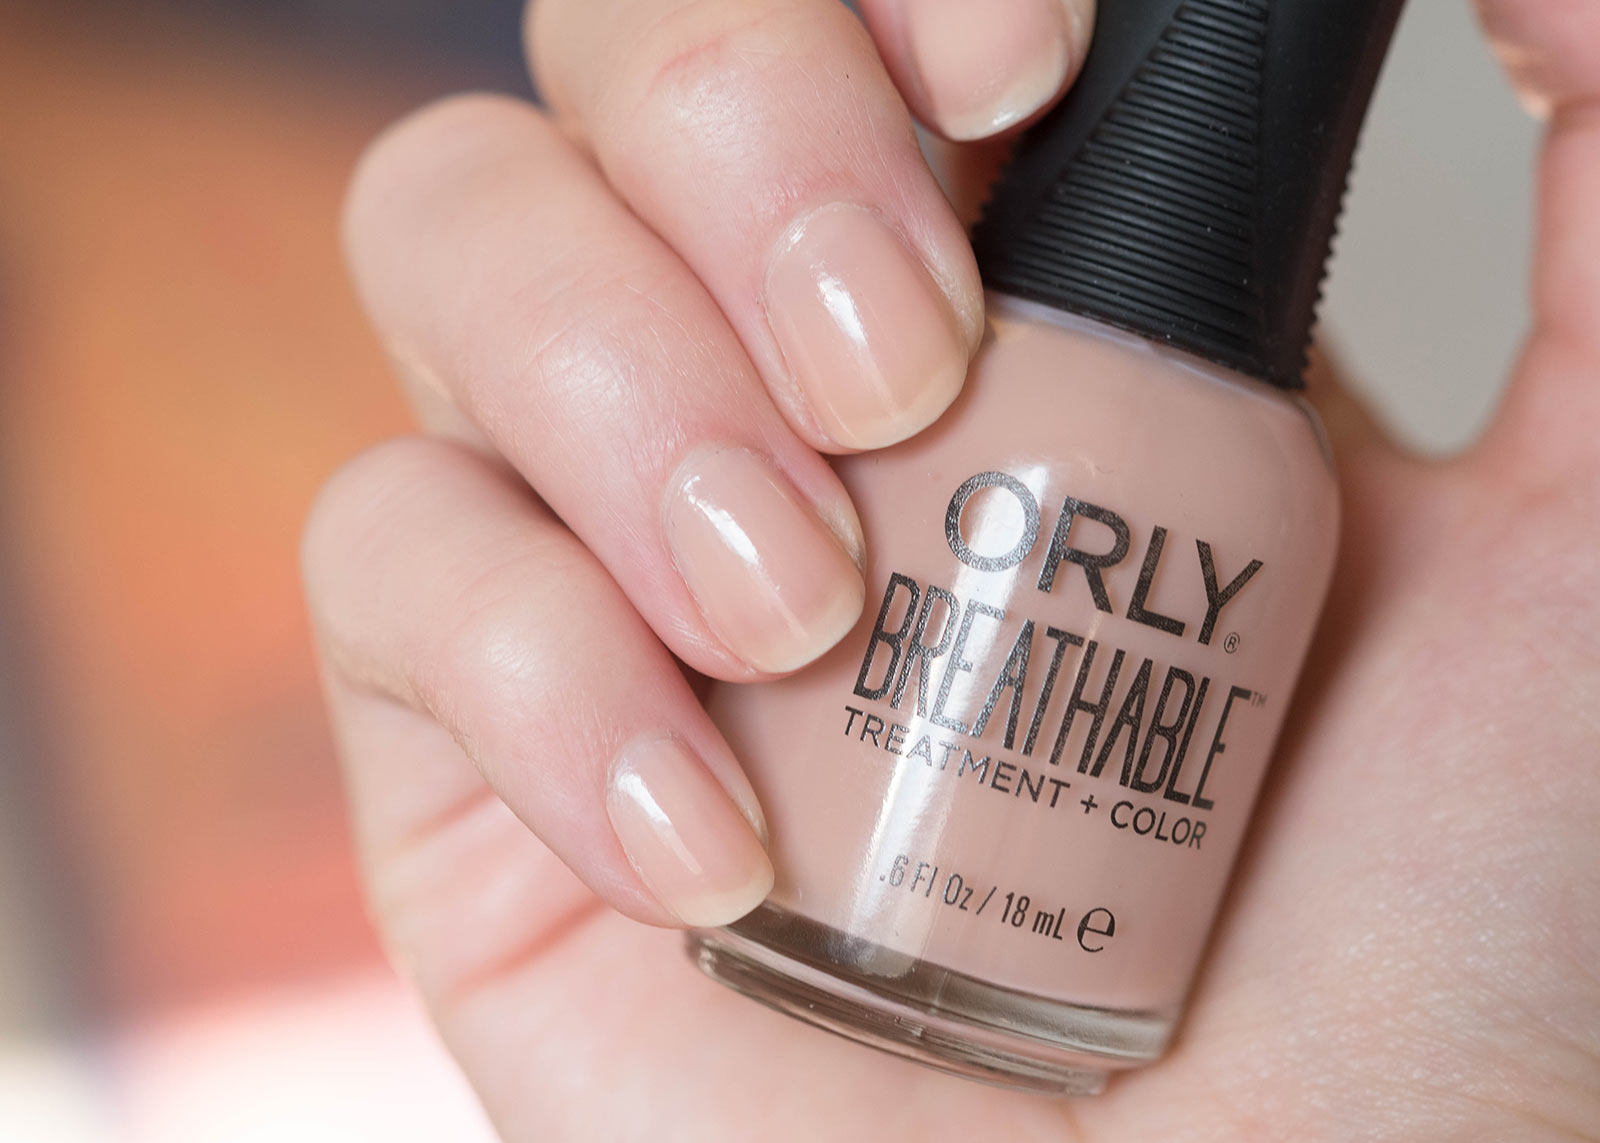 ORLY Breathable Treatment + Color Nail Polish in "Love My Nails" - wide 1